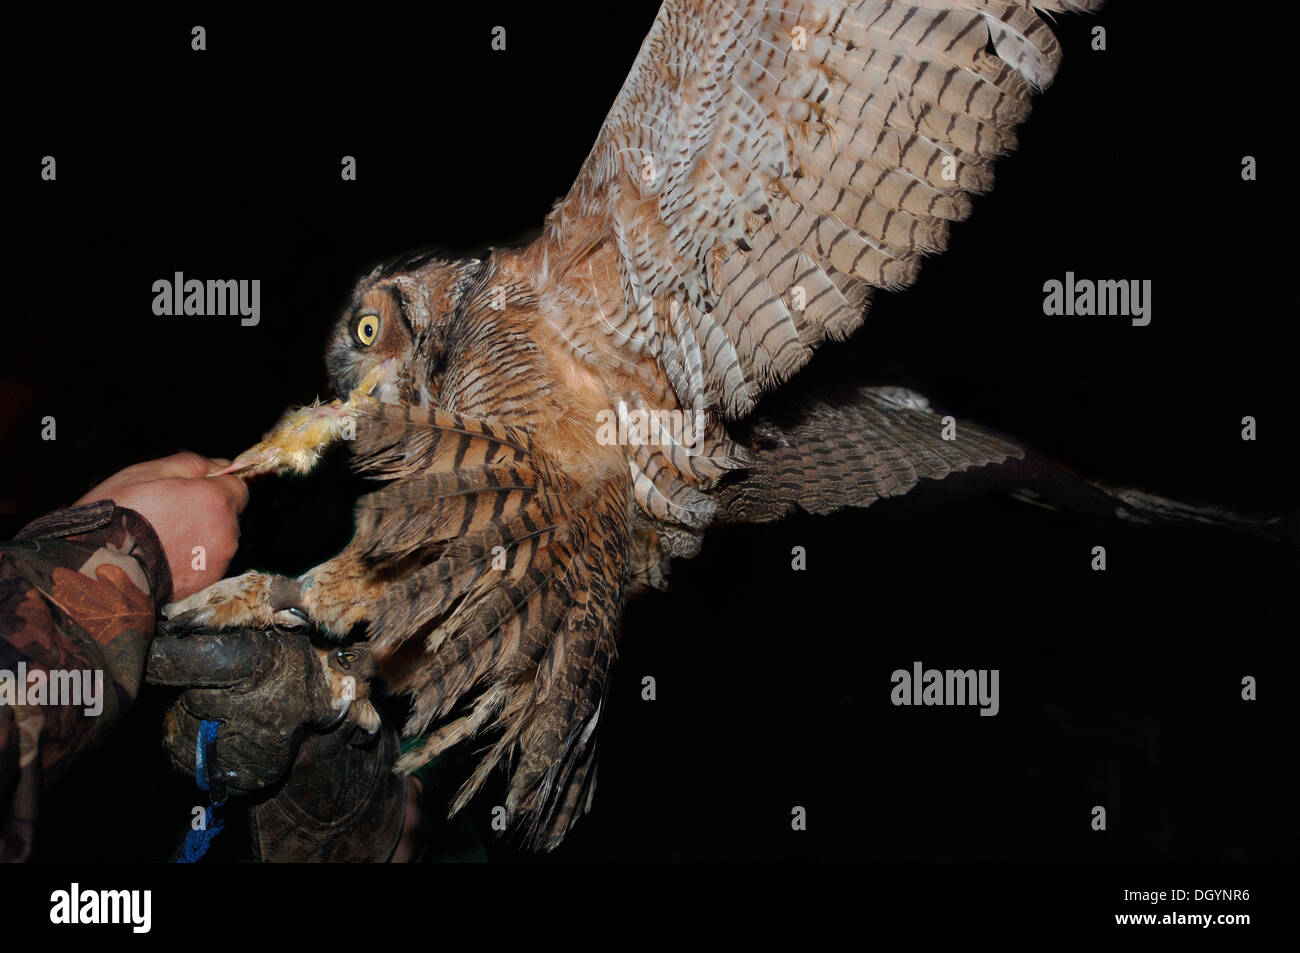 A Great Horned Owl On Falconers Glove At Night Feeding.(Bubo virginianus) Stock Photo